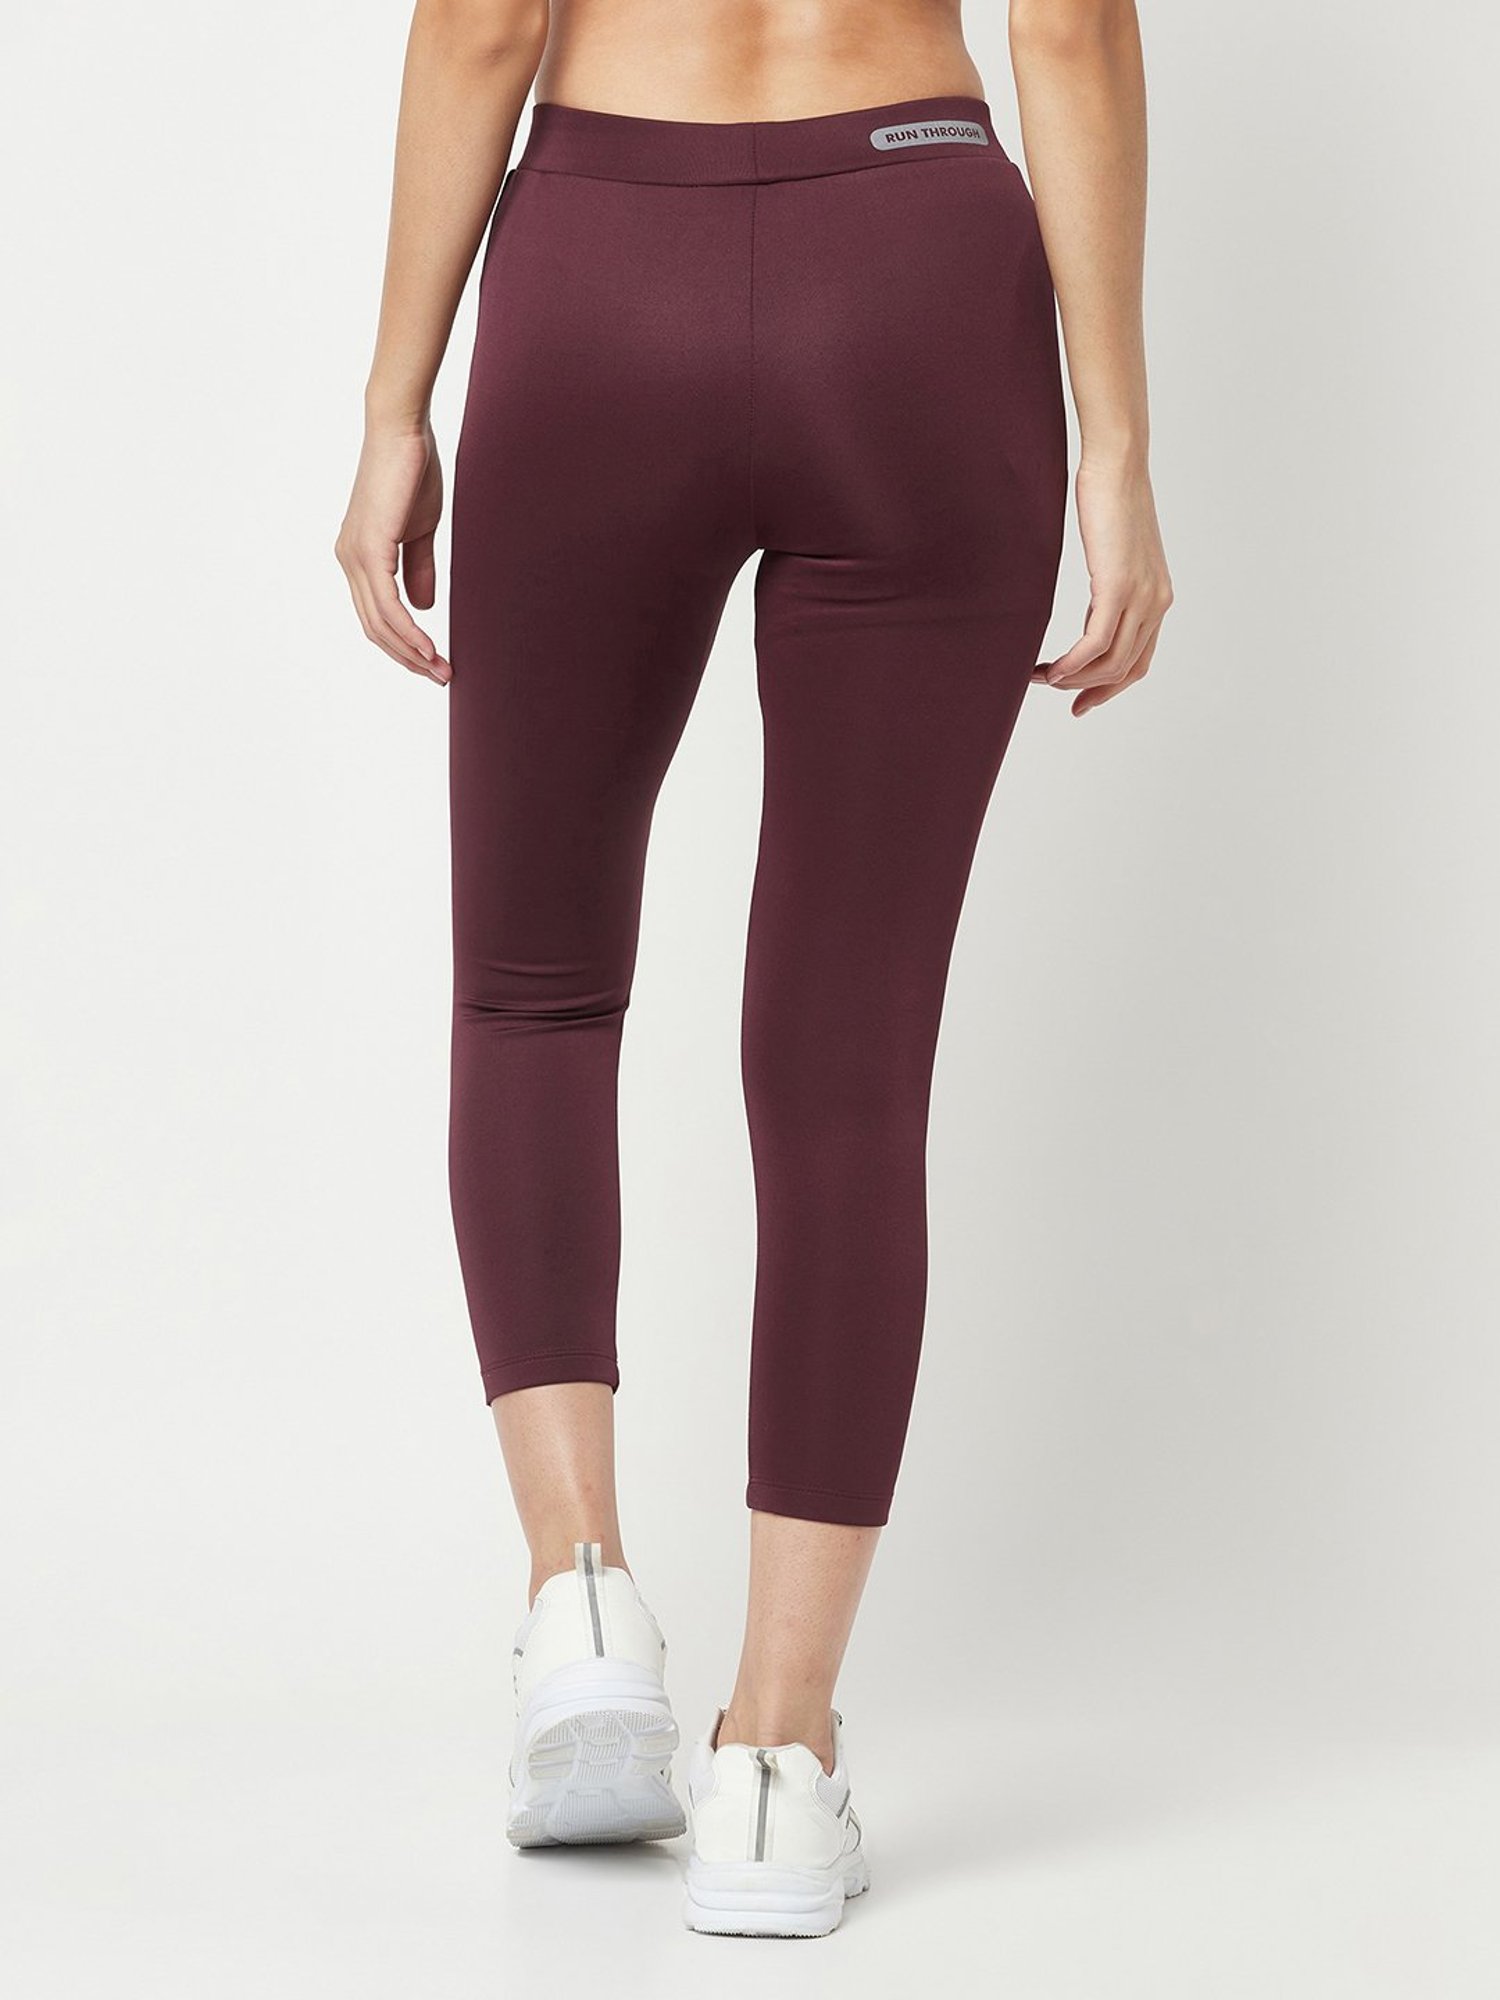 SILVERTRAQ Brown Relaxed Fit Leggings